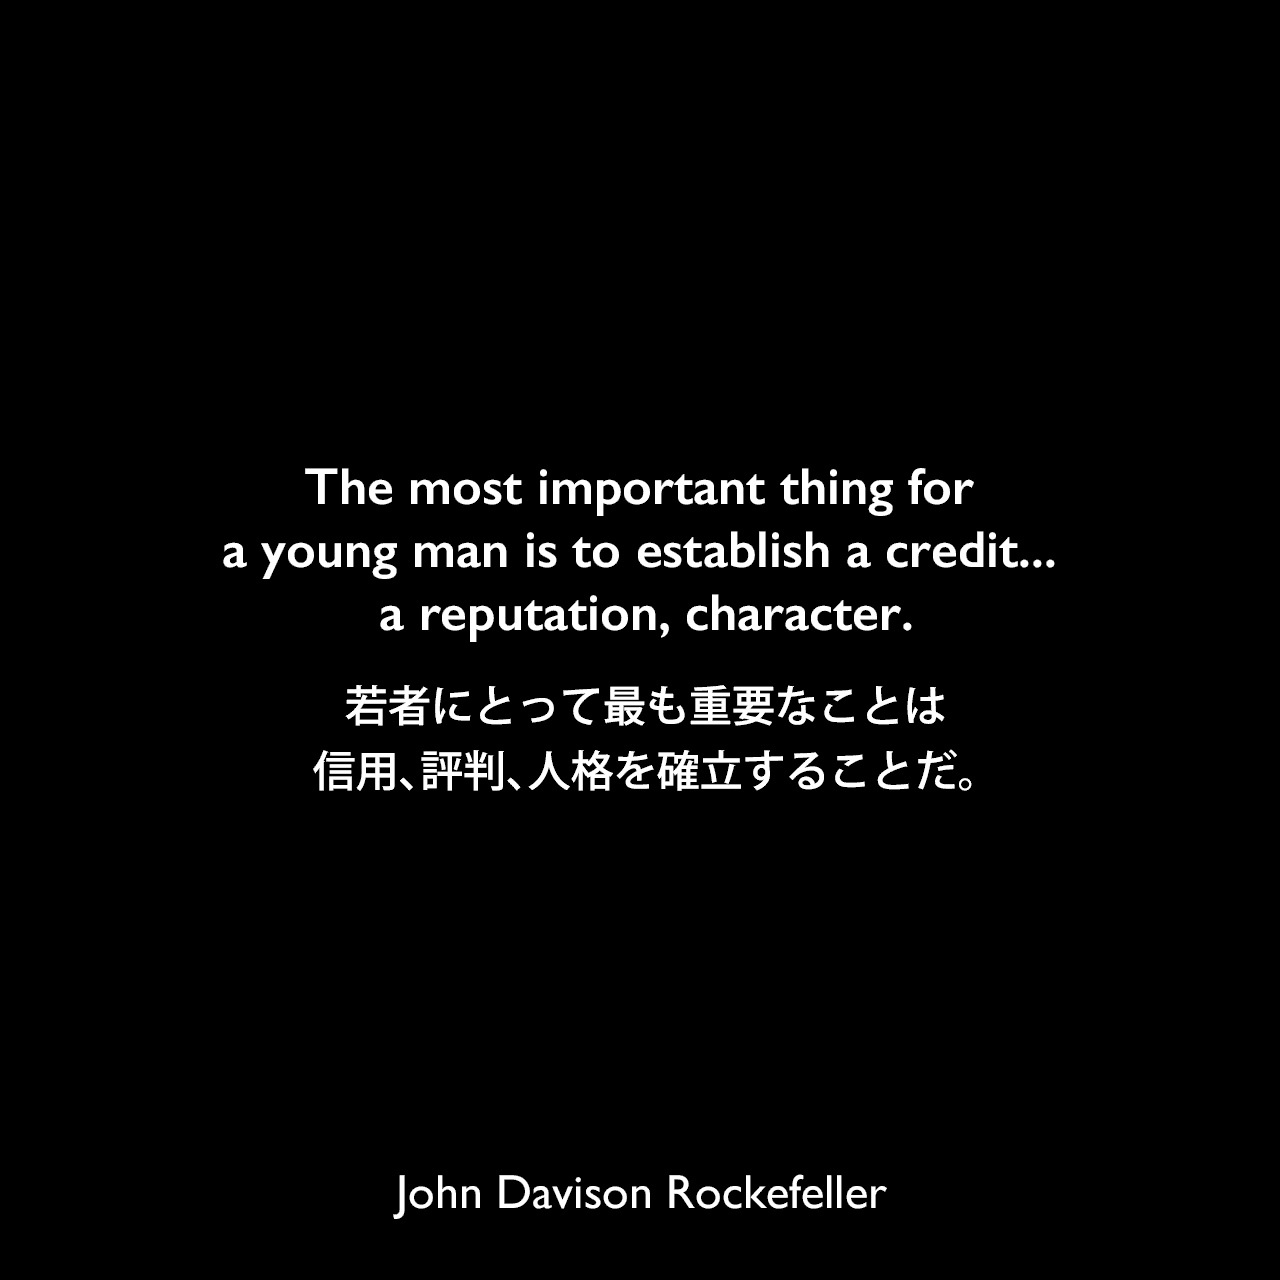 The most important thing for a young man is to establish a credit... a reputation, character.若者にとって最も重要なことは、信用、評判、人格を確立することだ。John Davison Rockefeller